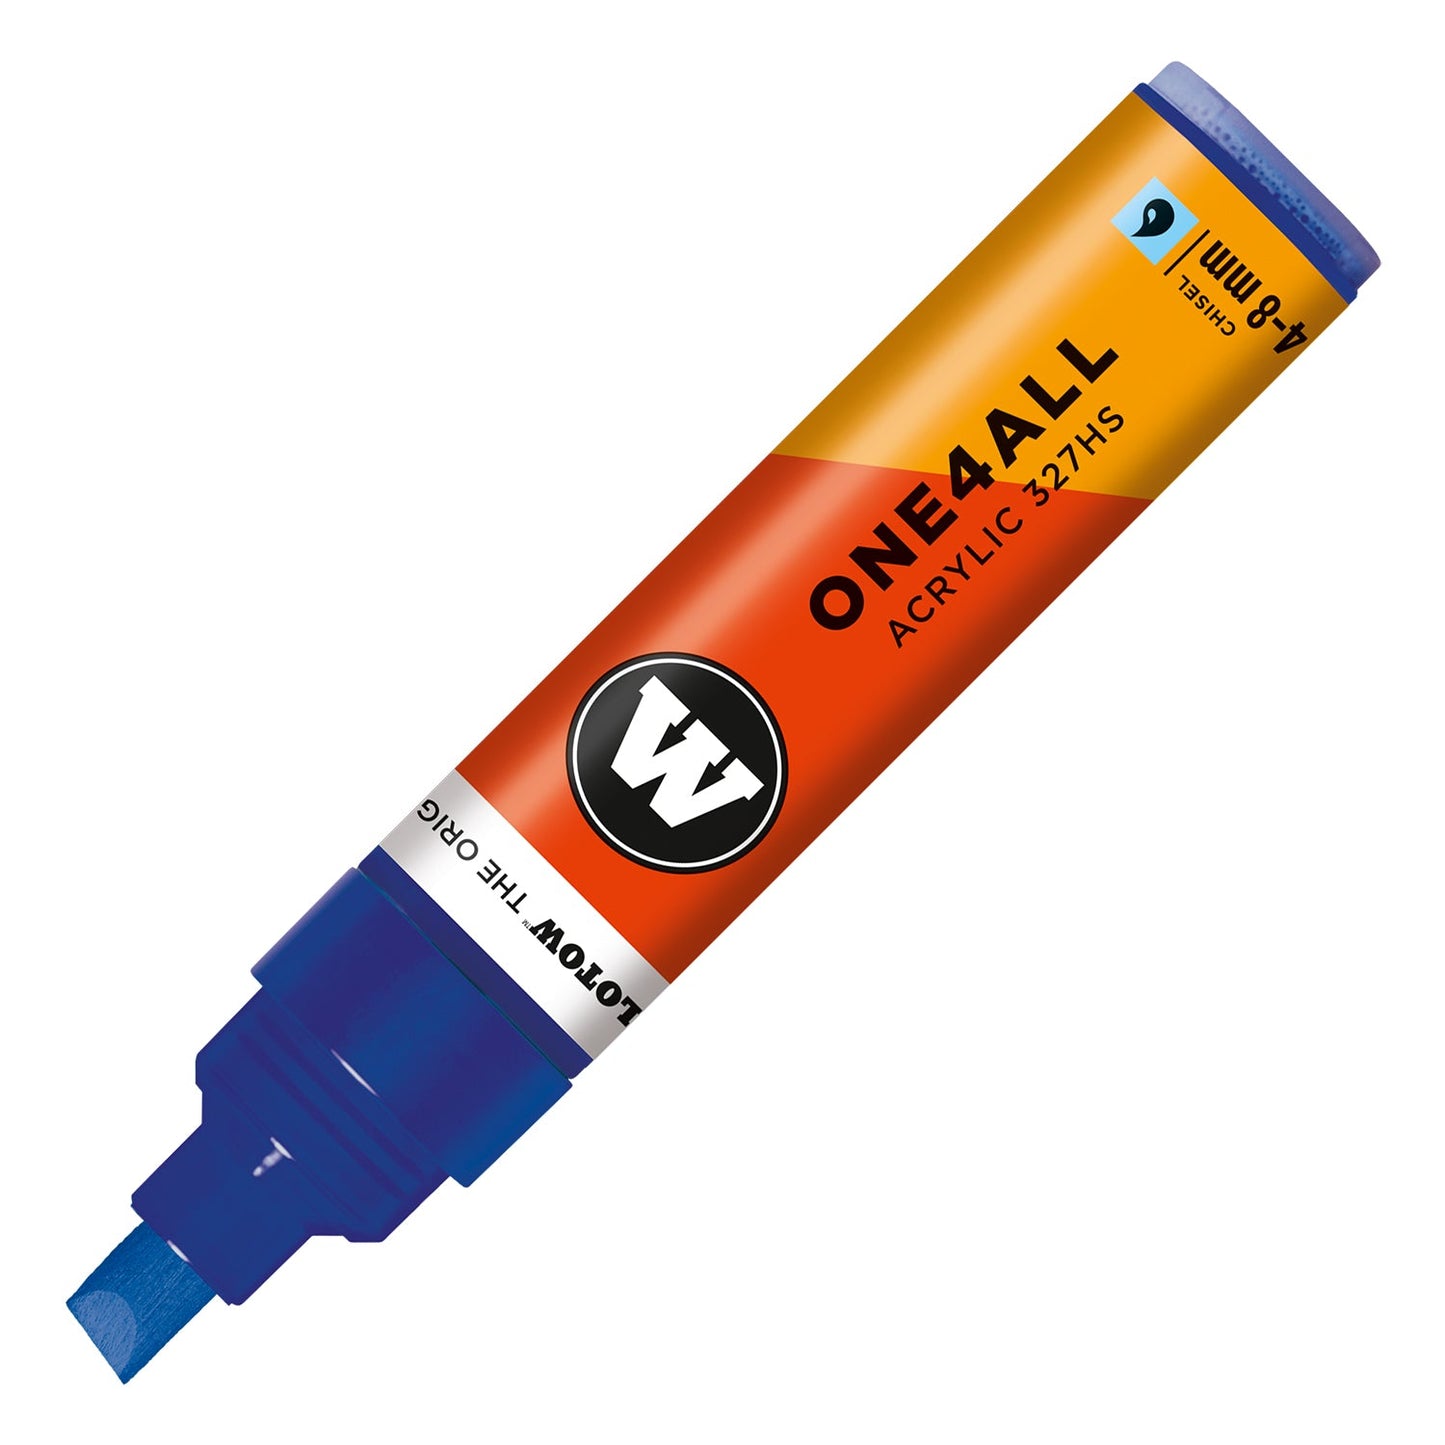 Marqueur acrylique Molotow ONE4ALL 327HS 4-8 mm